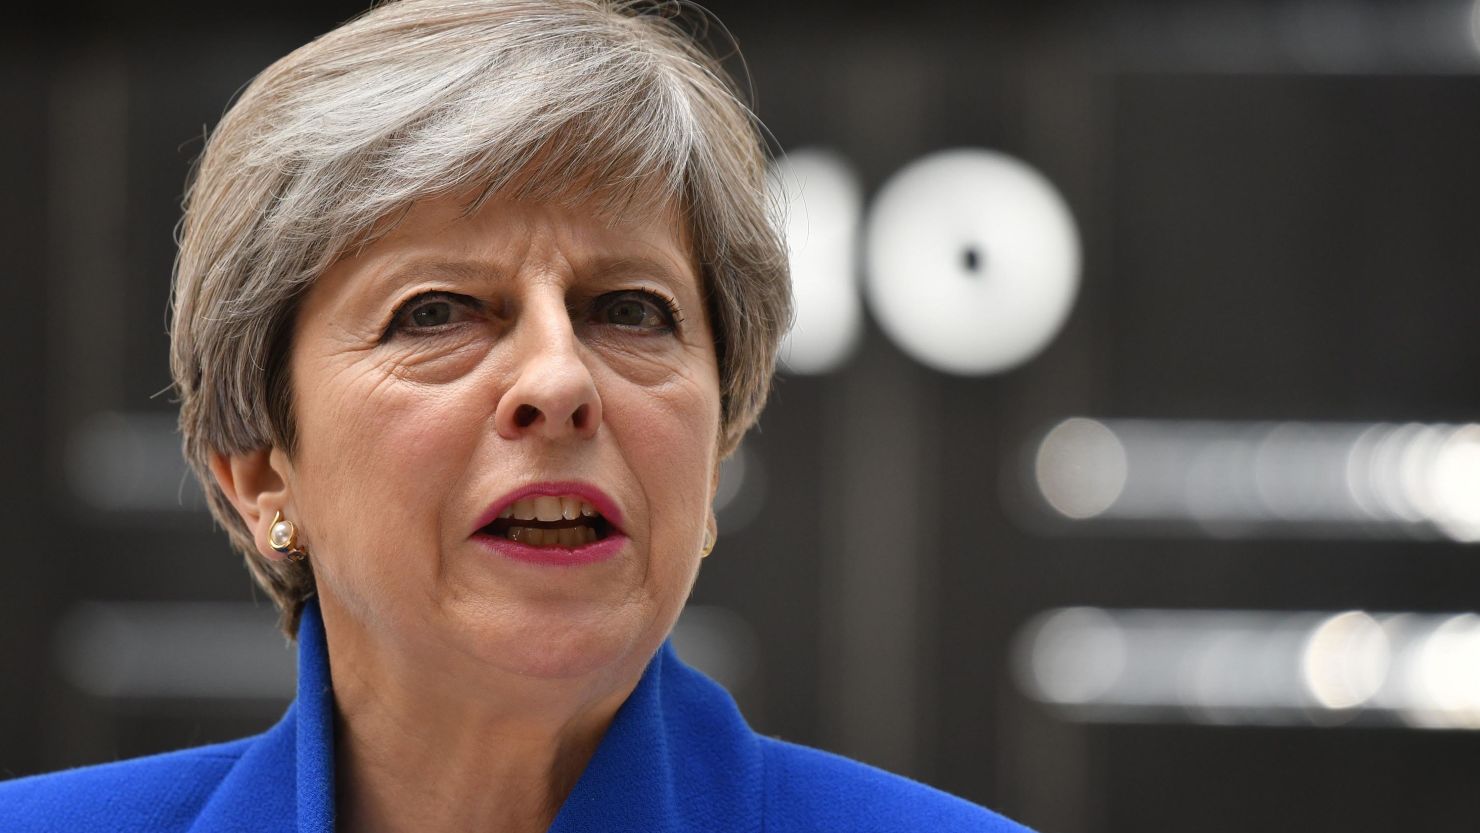 Britain's Prime Minister and leader of the Conservative Party Theresa May makes a statement outside 10 Downing Street in central London on June 9, 2017 as results from a snap general election show her party has lost their majority.
